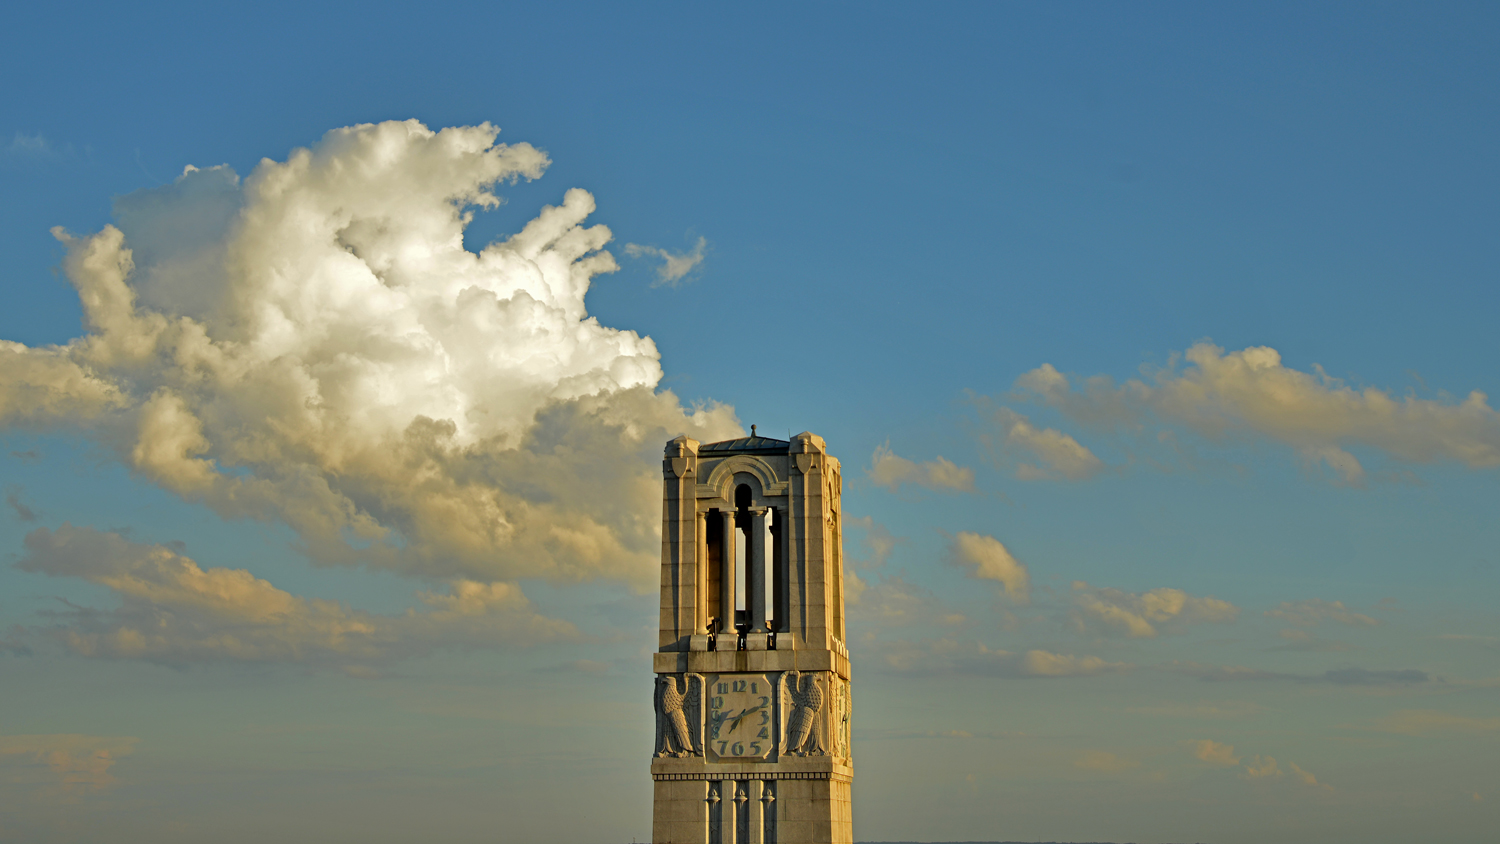 Campus Belltower with clouds